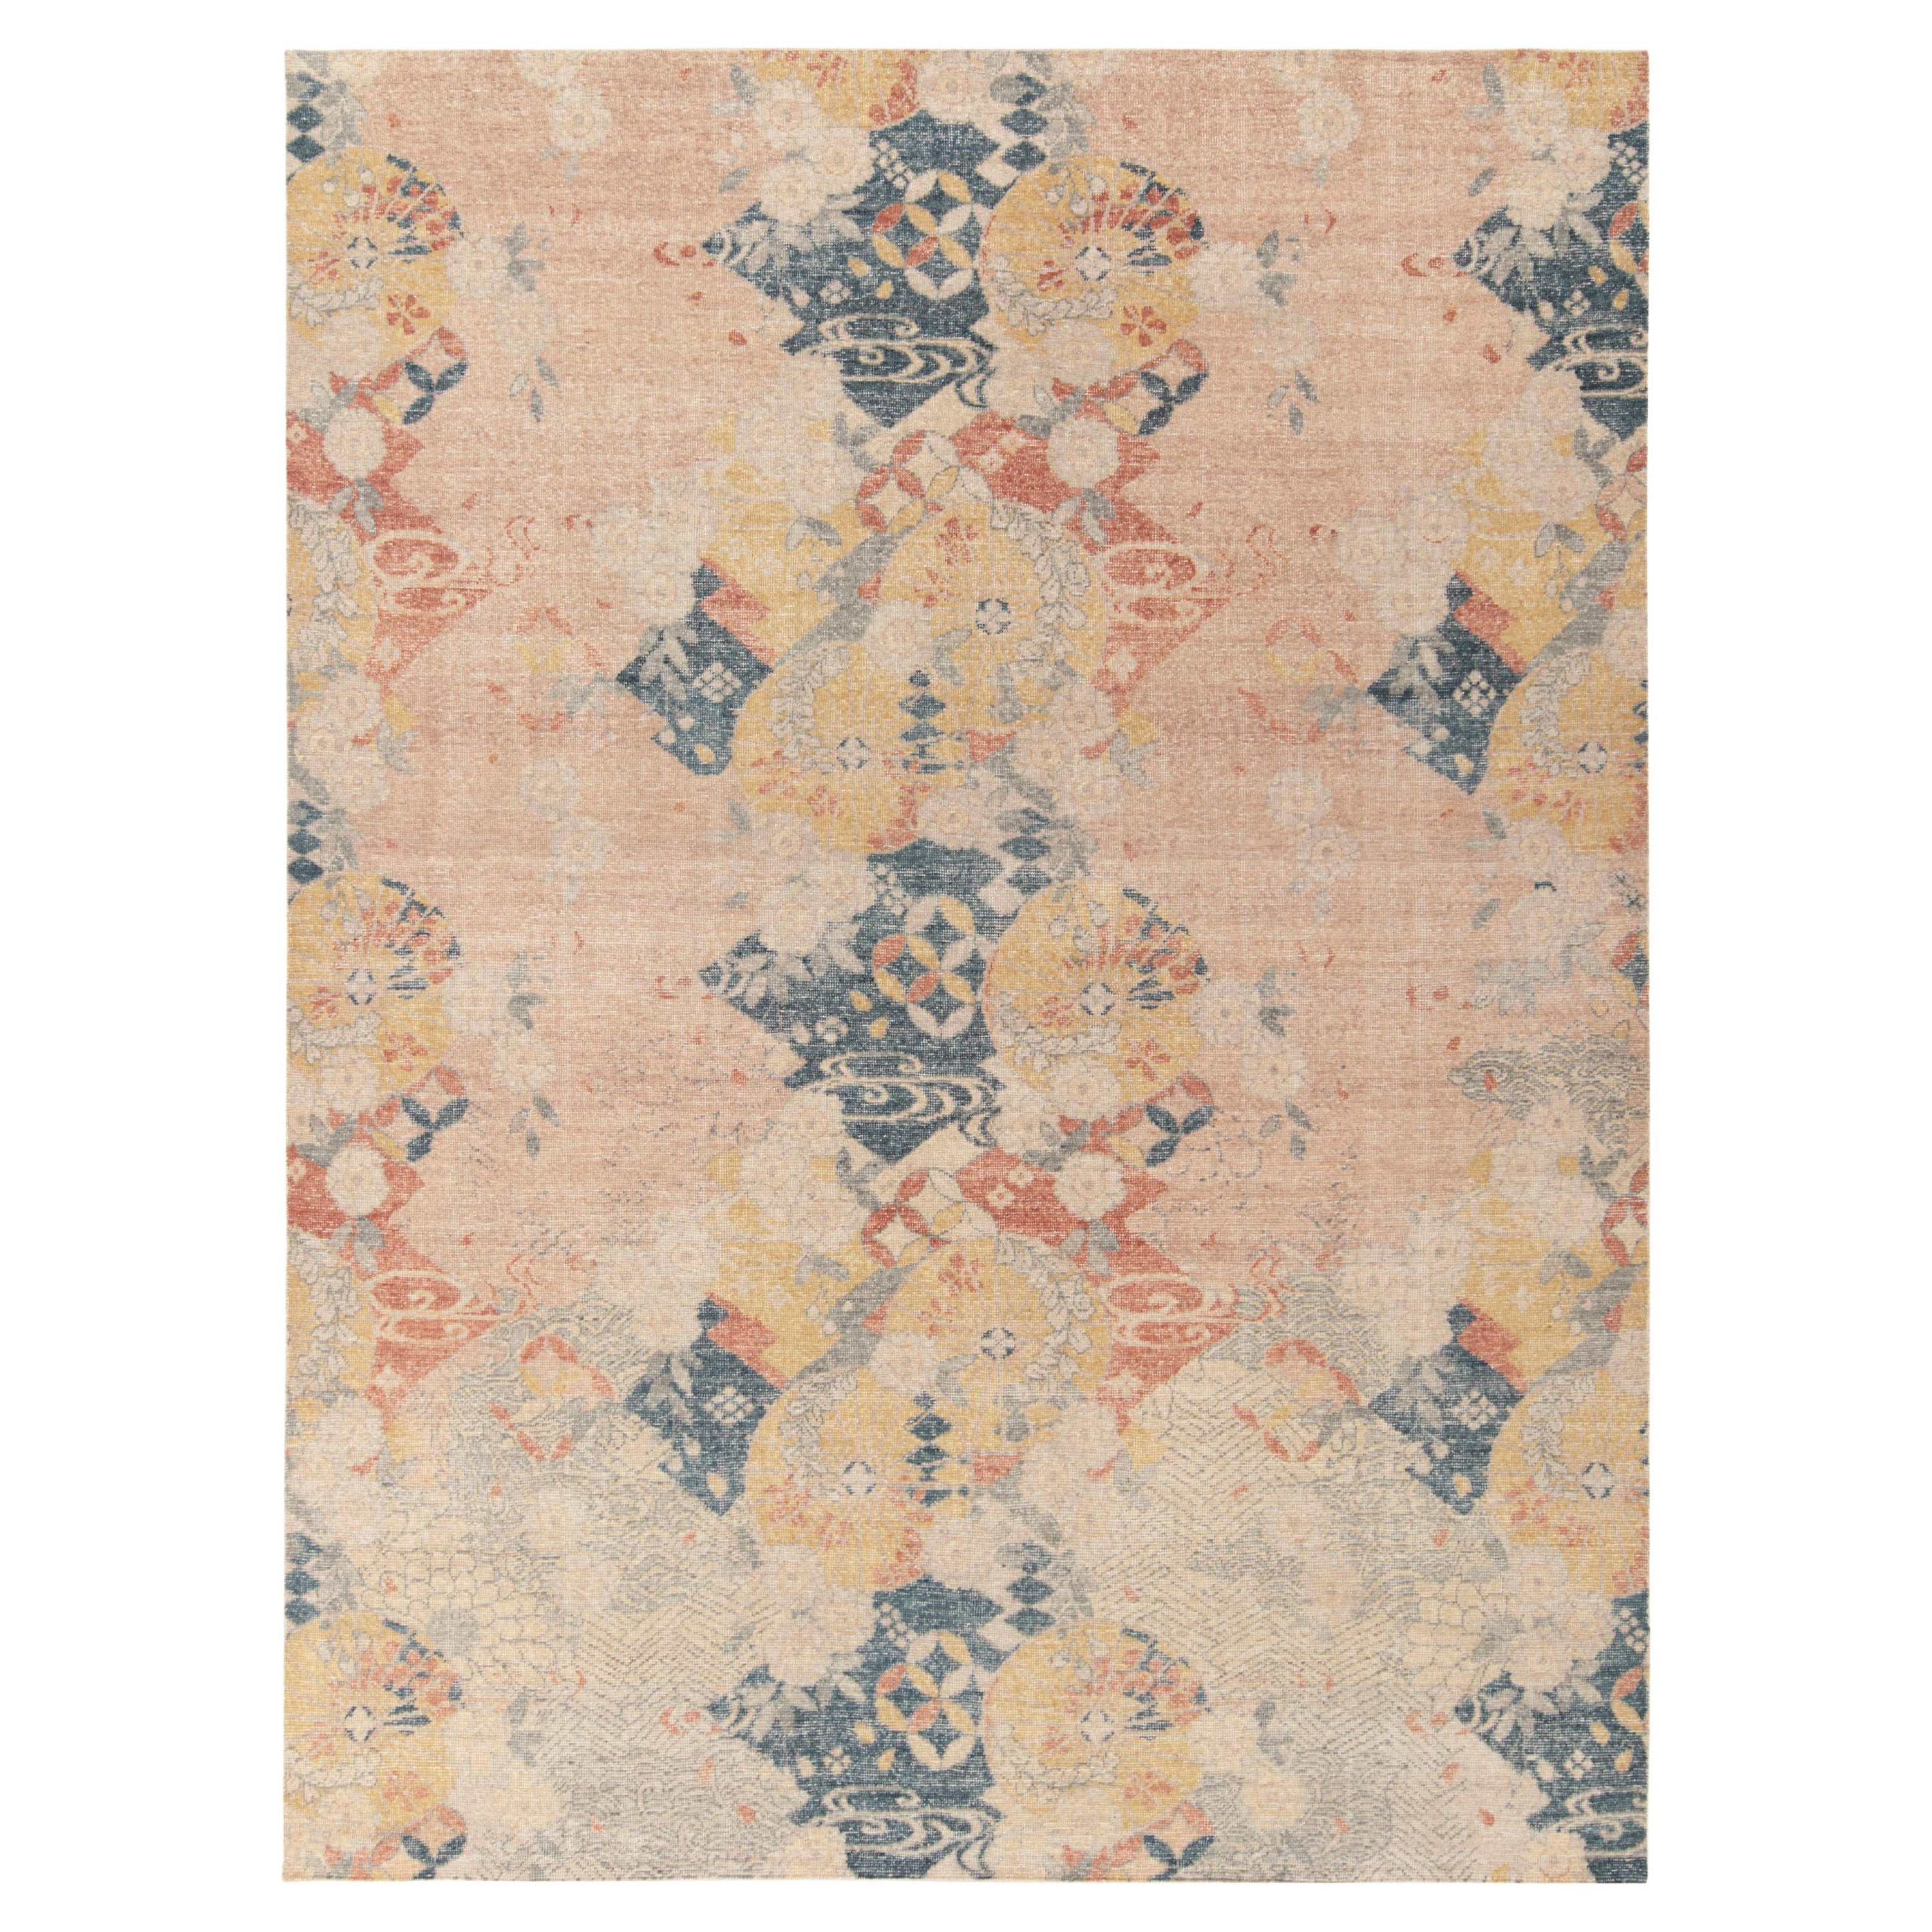 Rug & Kilim's Distressed Japanese Deco Style Teppich in Blau, Rosa All over Muster im Angebot